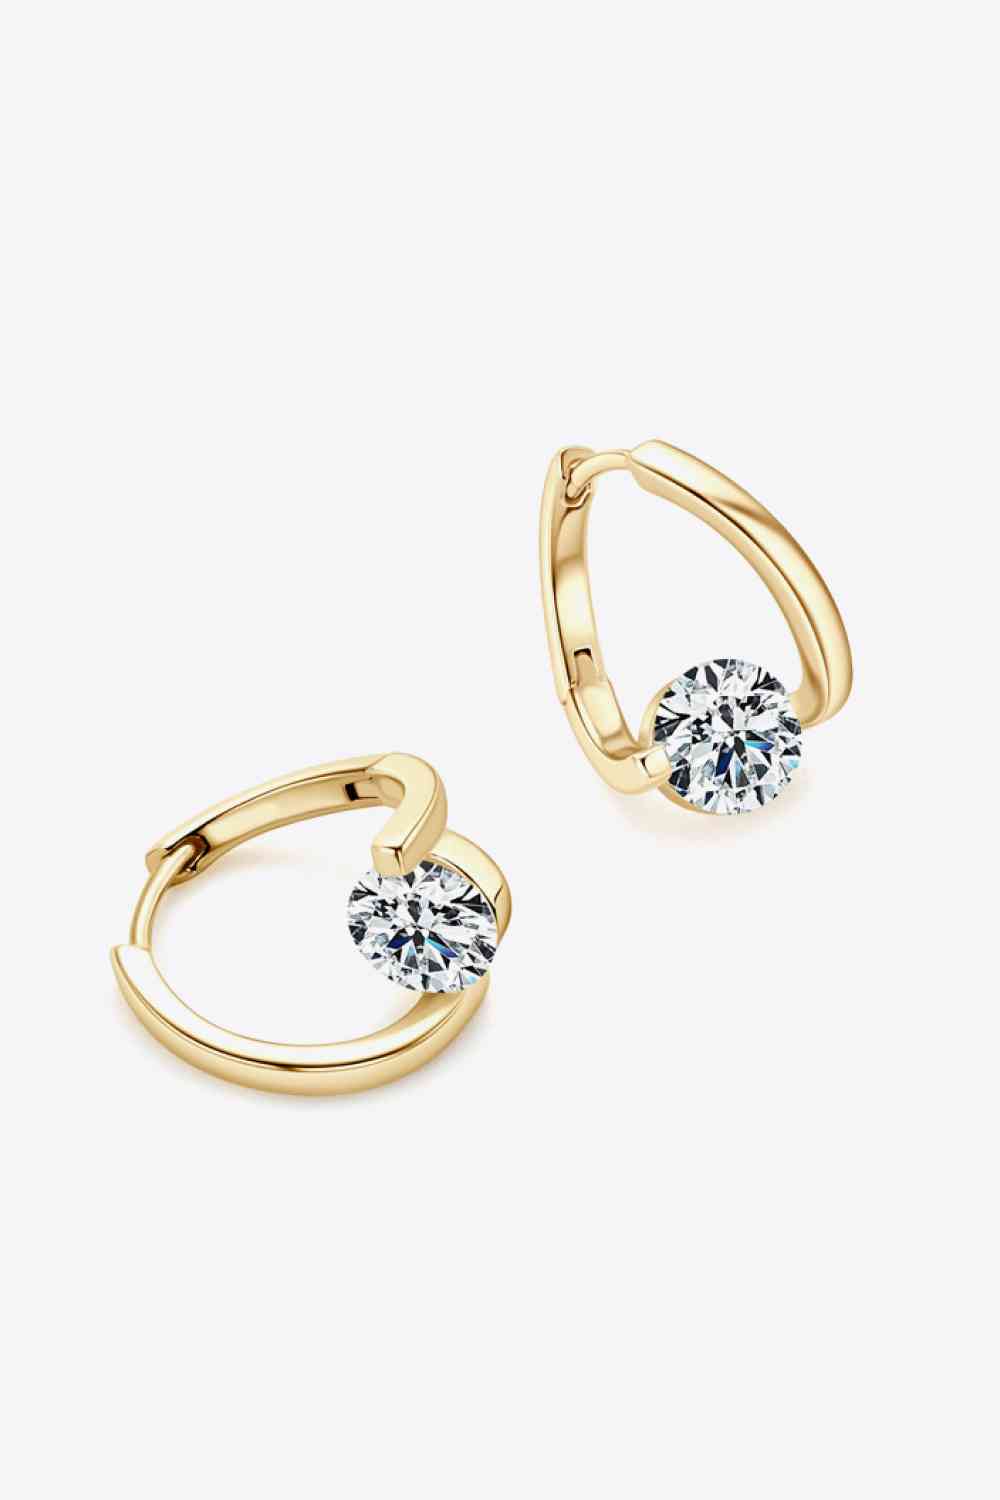 a pair of gold hoop earrings with a diamond